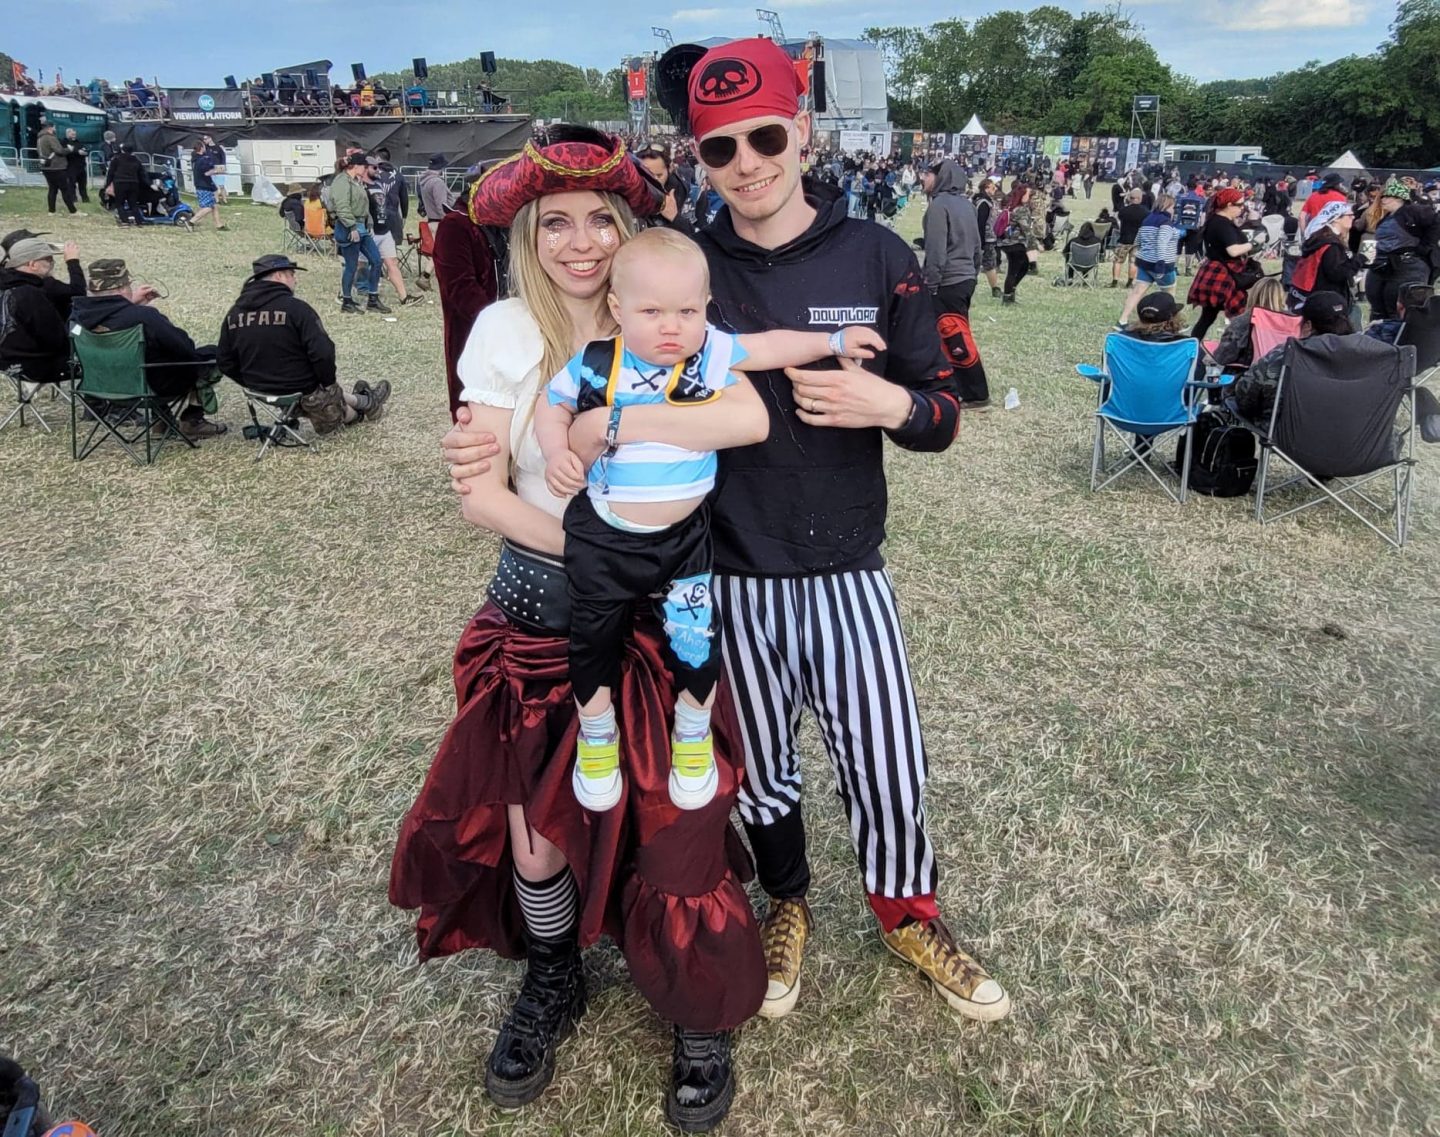 Pirate family at Download Festival 2022